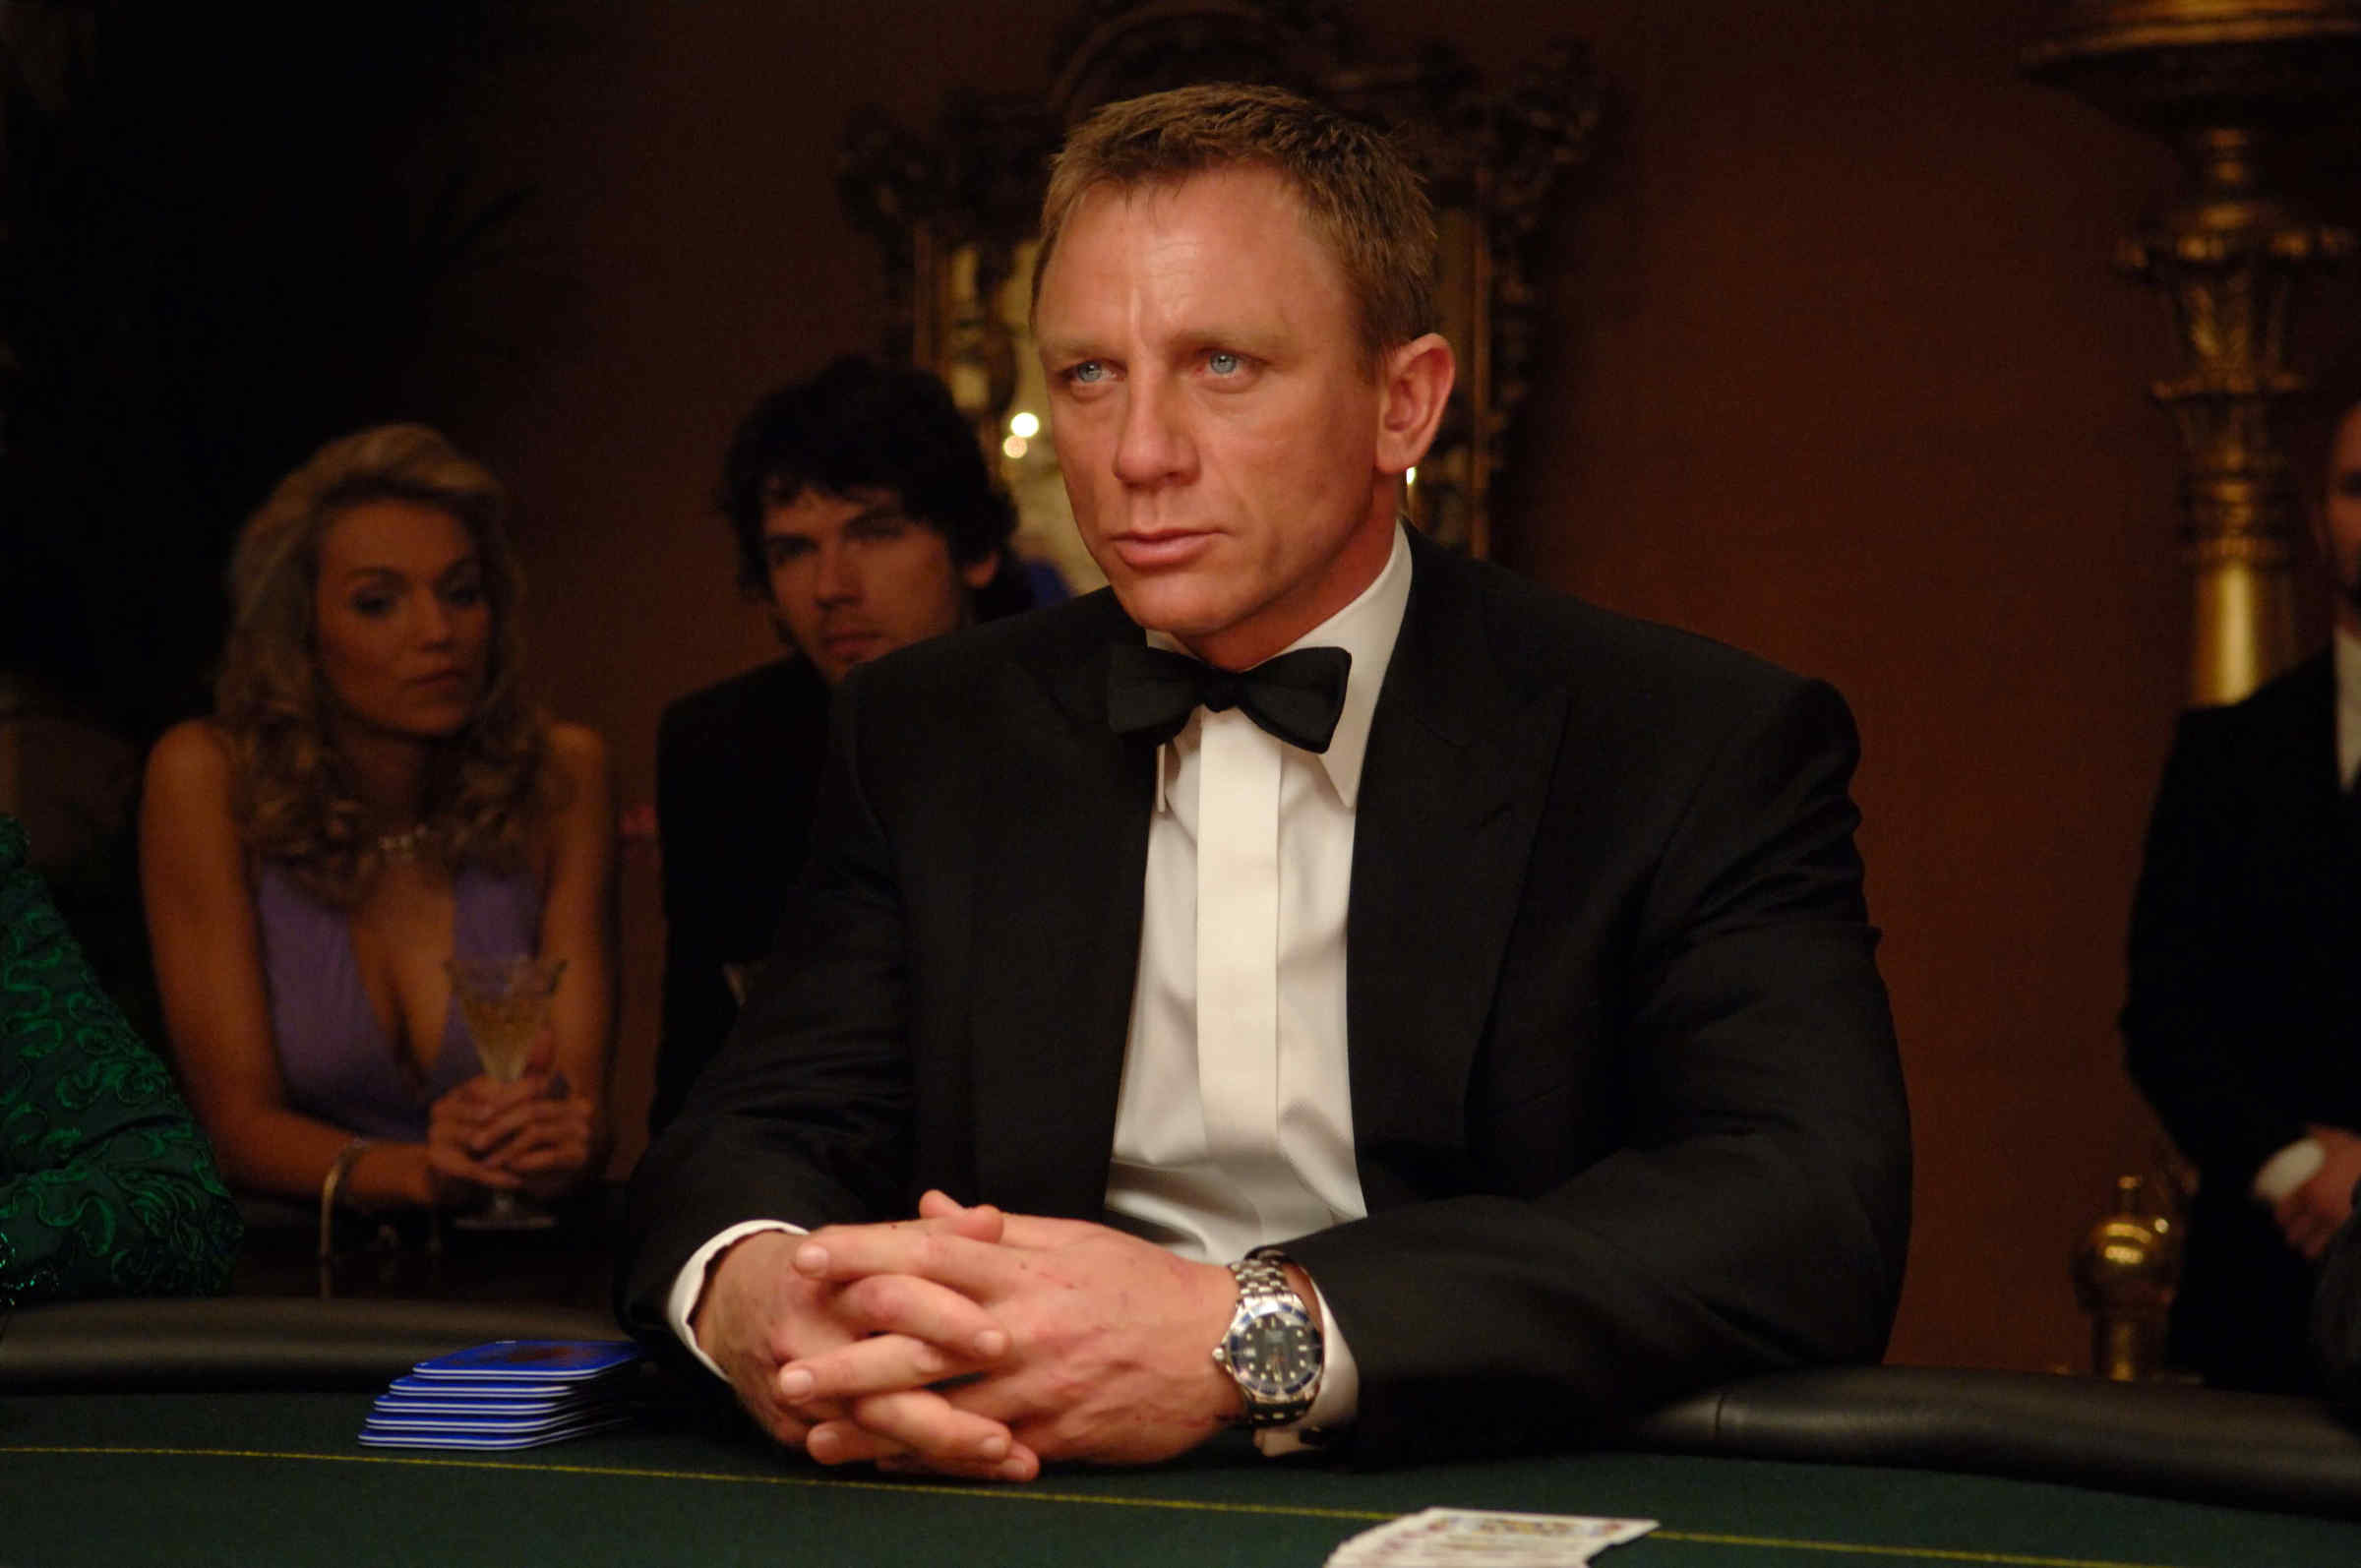 The 'James Bond' movies featured famous casinos from around the world. Take notes, then take a chance on playing the same winning hand as 007!